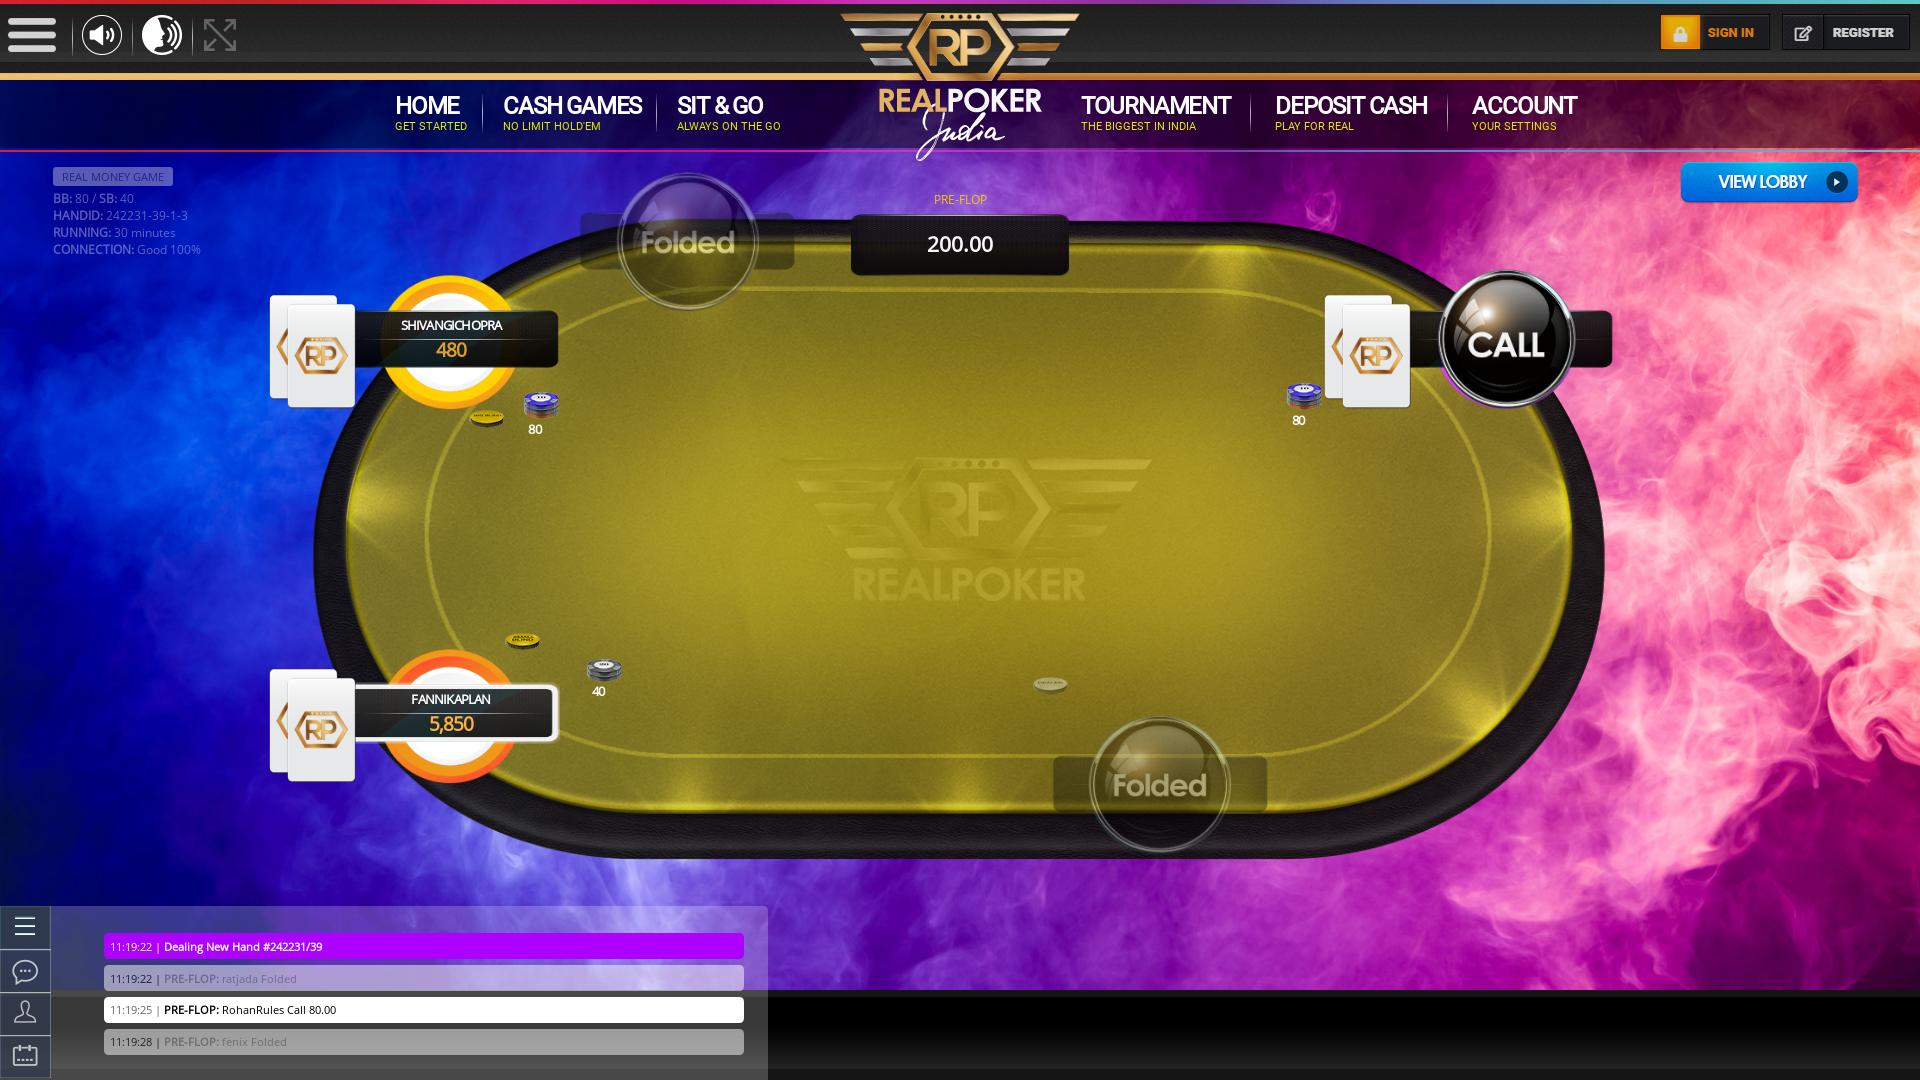 Real poker 10 player table in the 29th minute